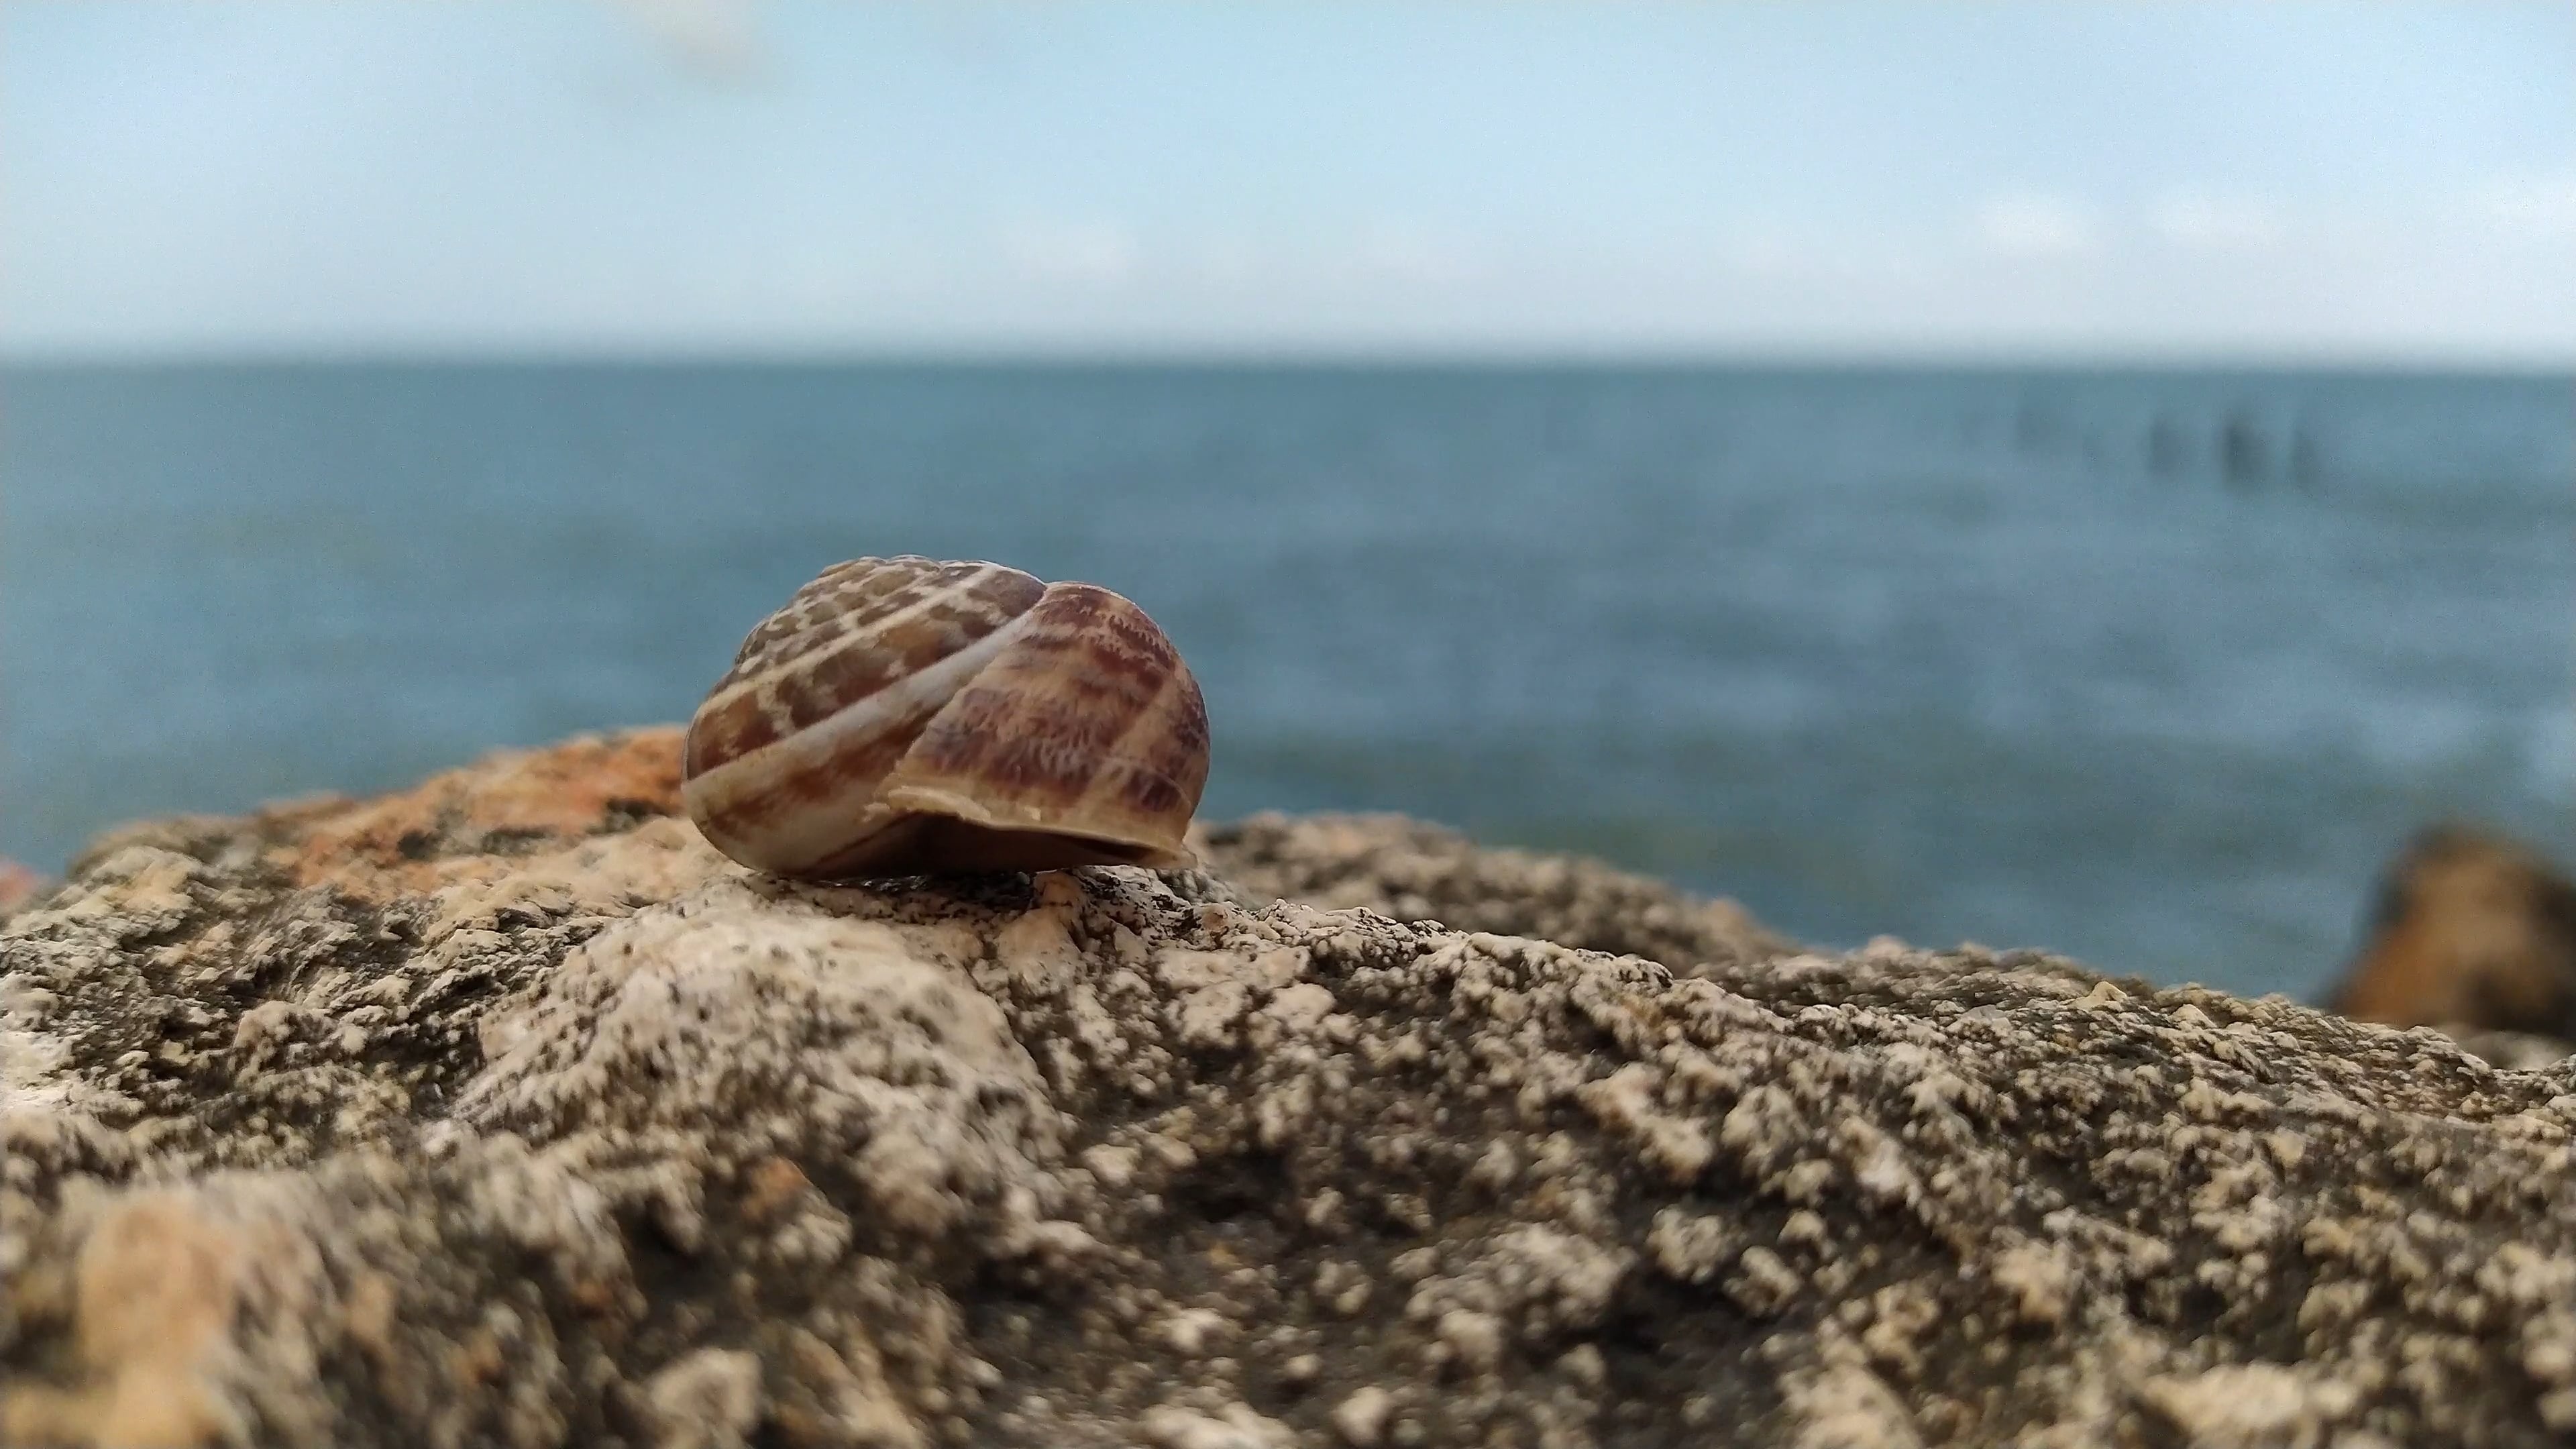 Sea Shell: Are empty because the animal has already died, Shore. 3840x2160 4K Wallpaper.